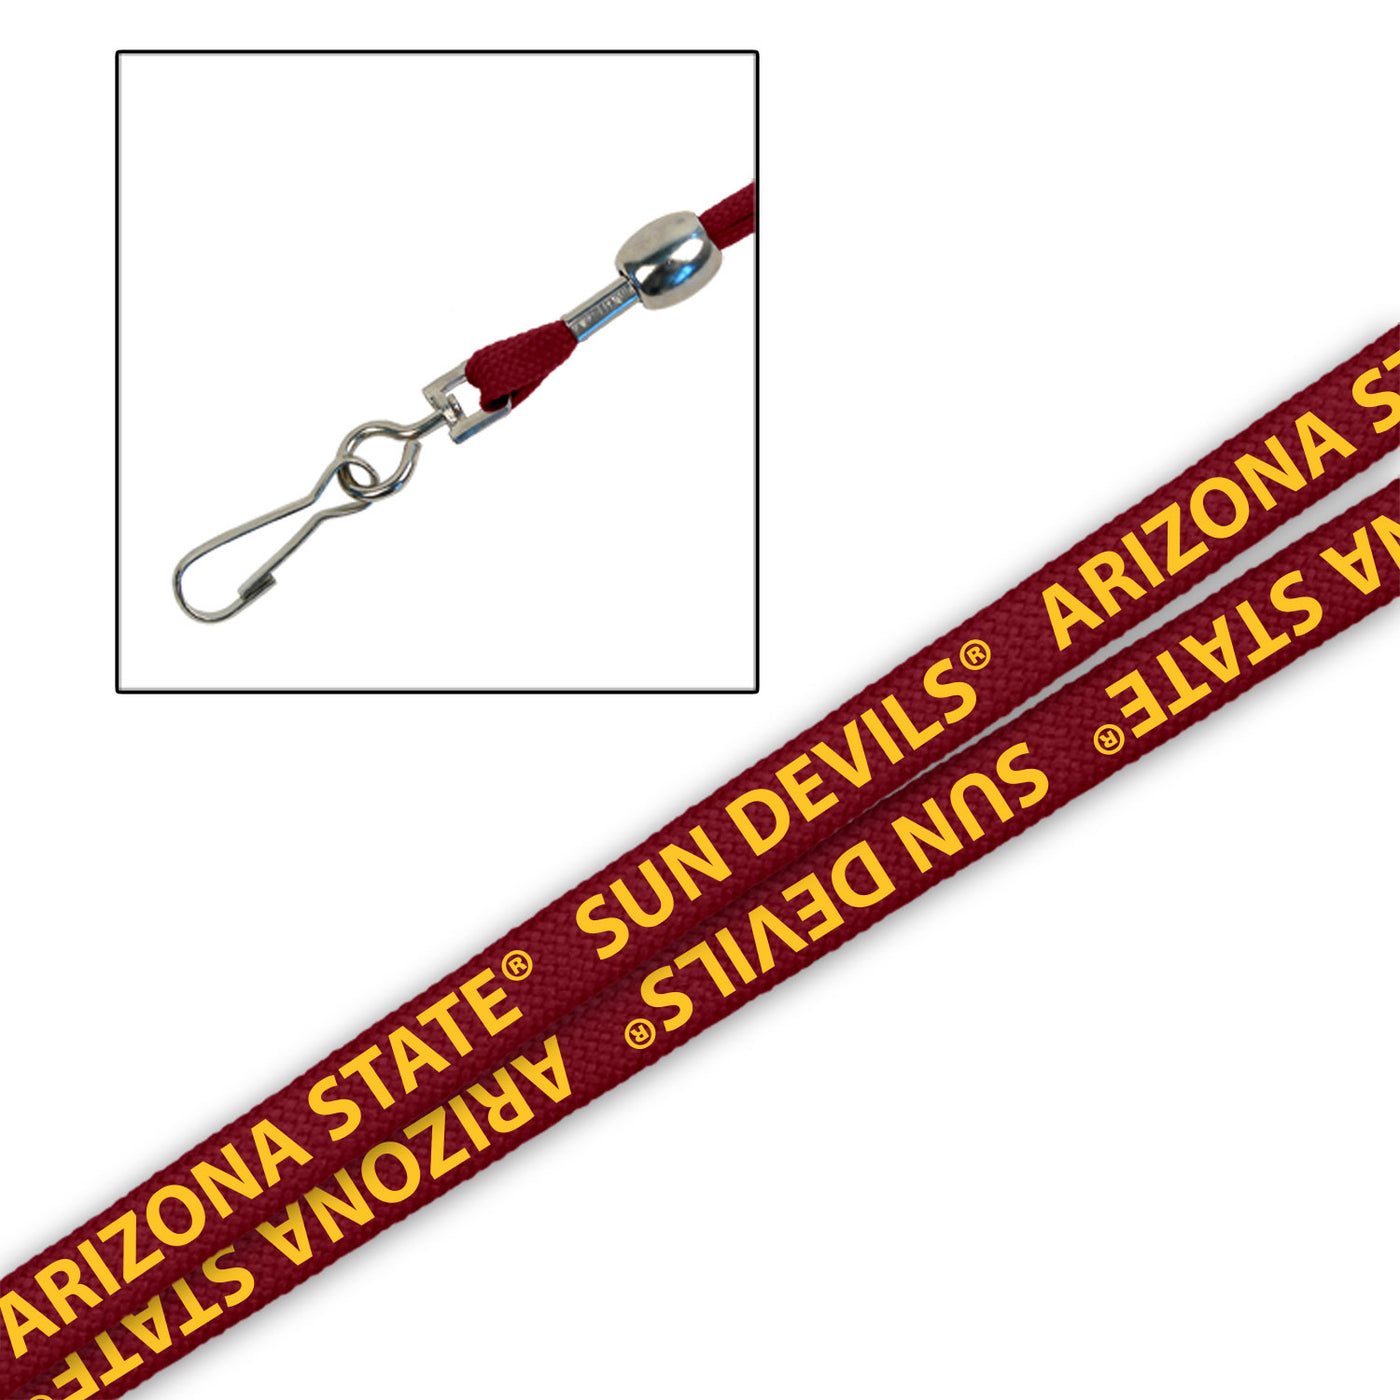 ASU Shoestring lanyard maroon with 'Arizona State' 'Sun Devils' text repeating with key attachment and metal bead neck size adjuster